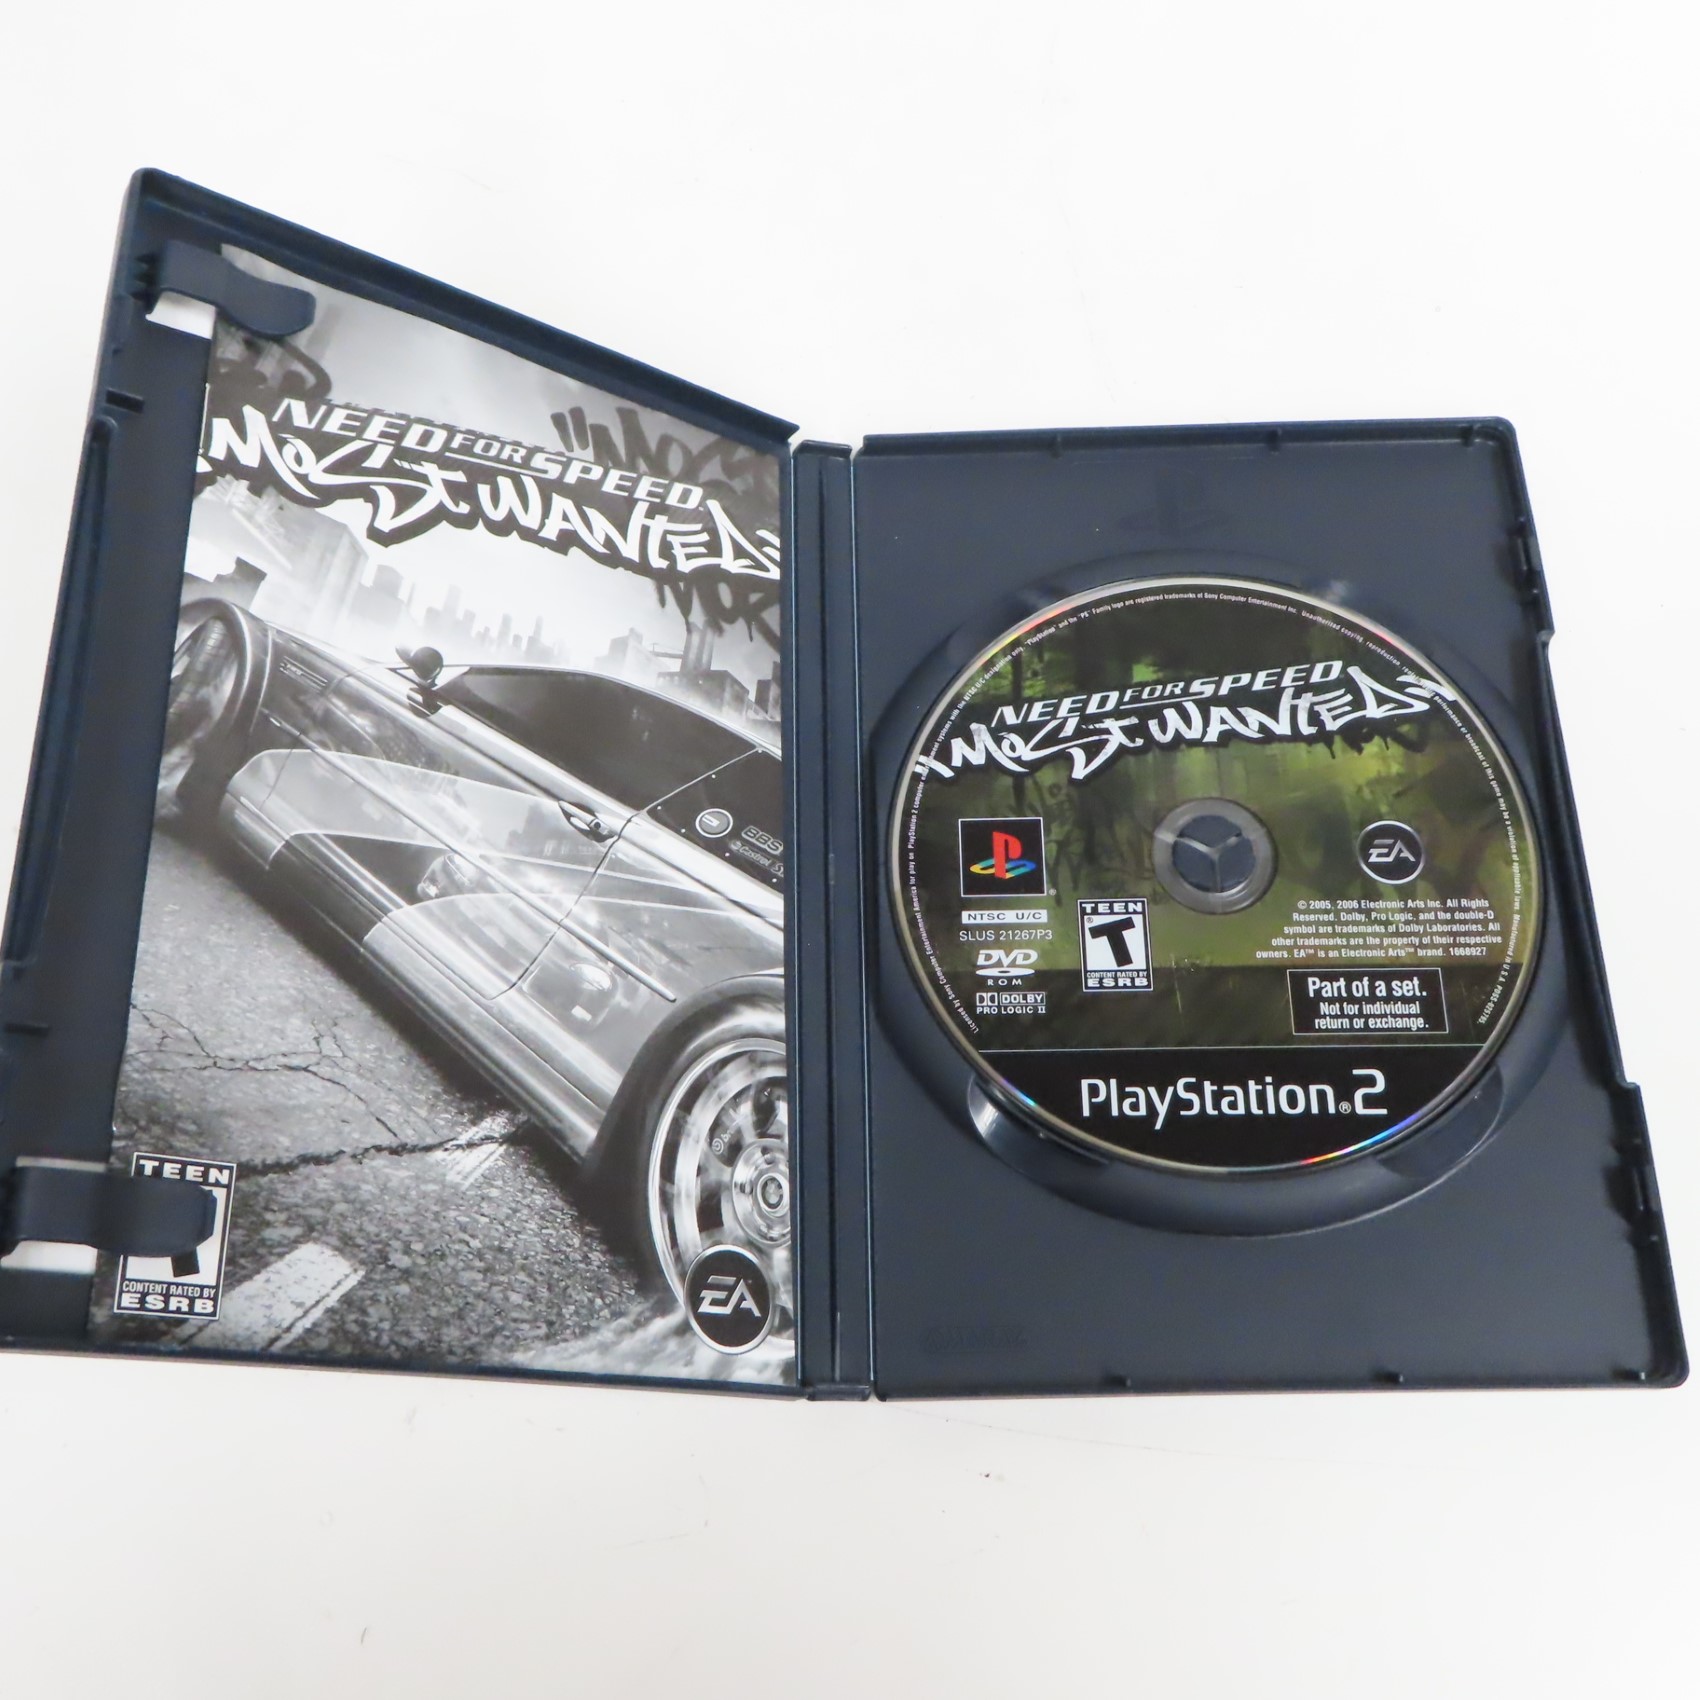 Need For Speed Most Wanted PS2 Playstation 2 Game For Sale